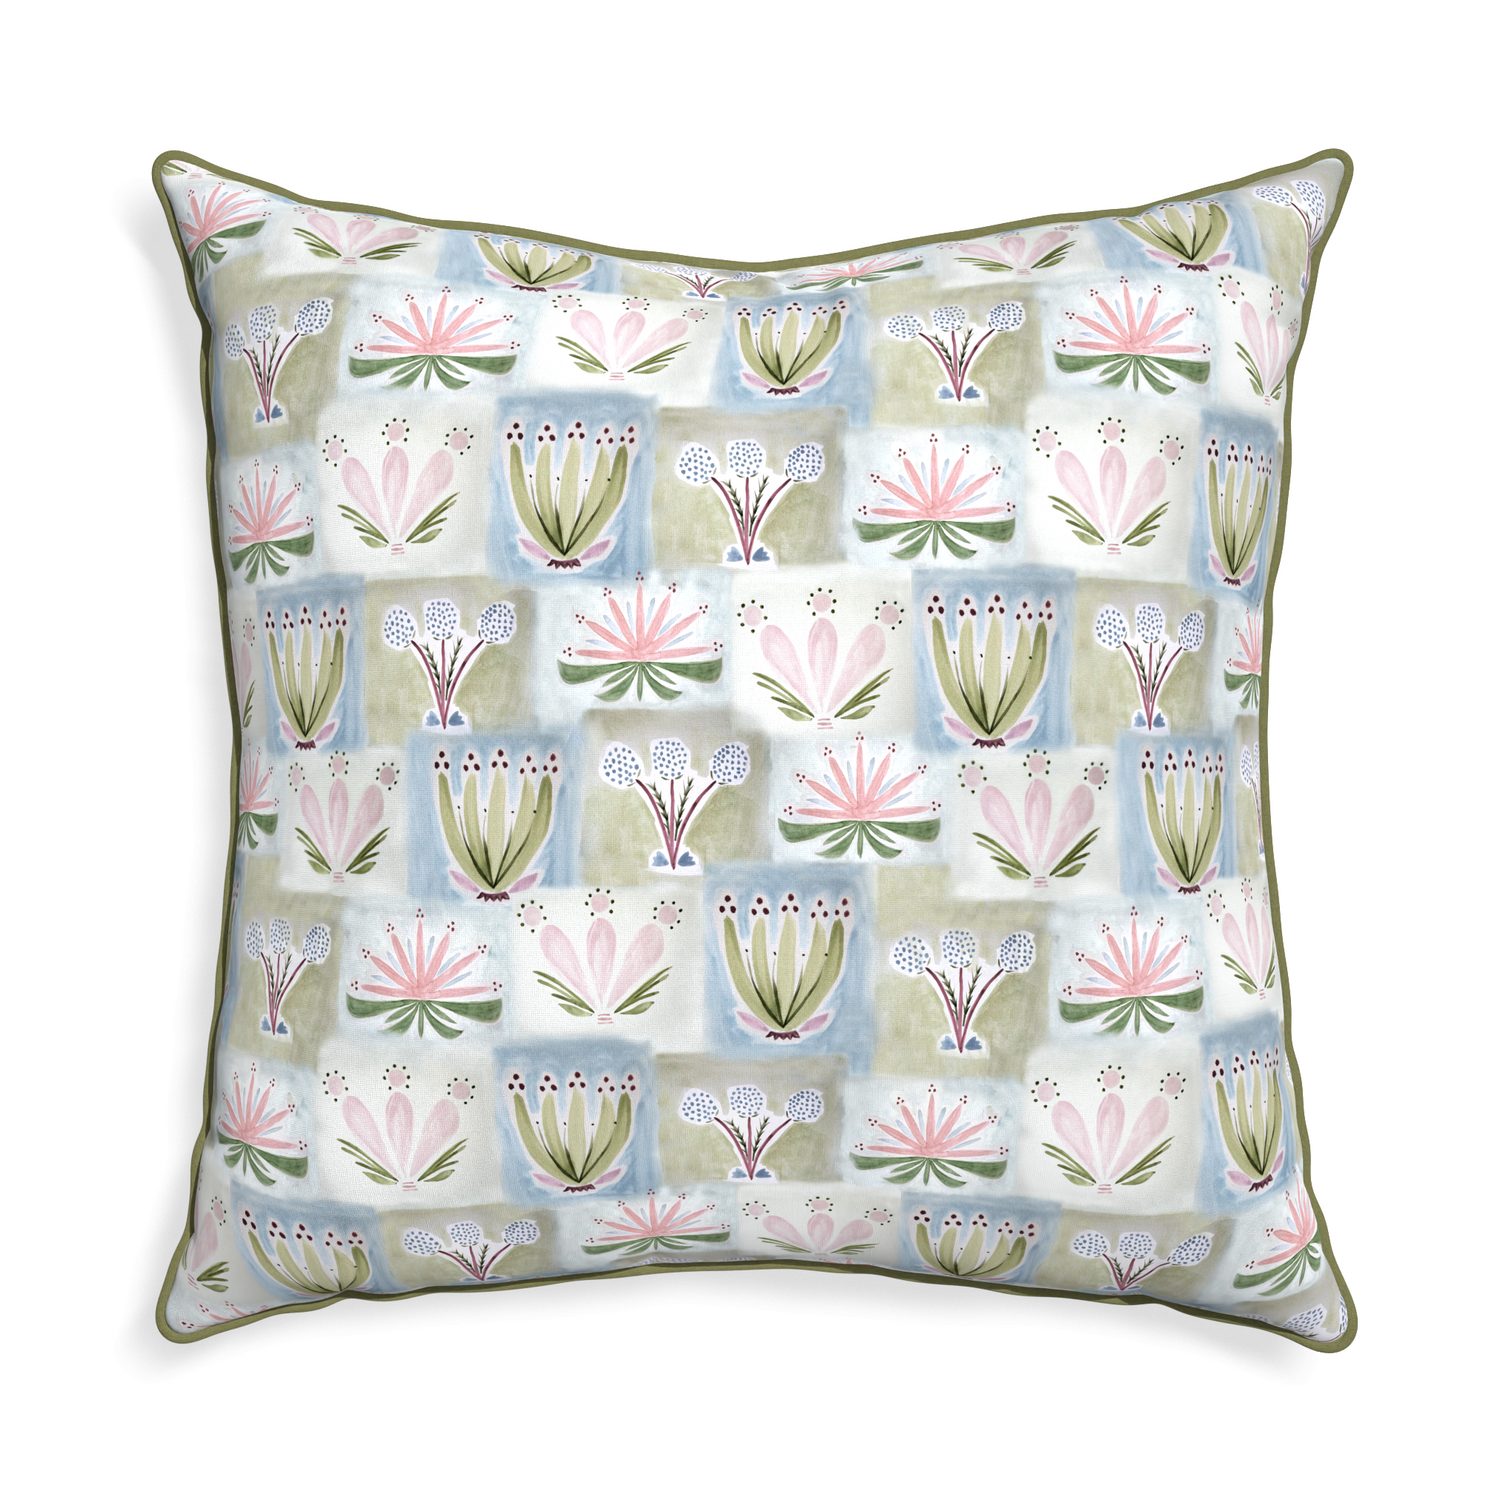 square hand painted floral pillow with moss green piping